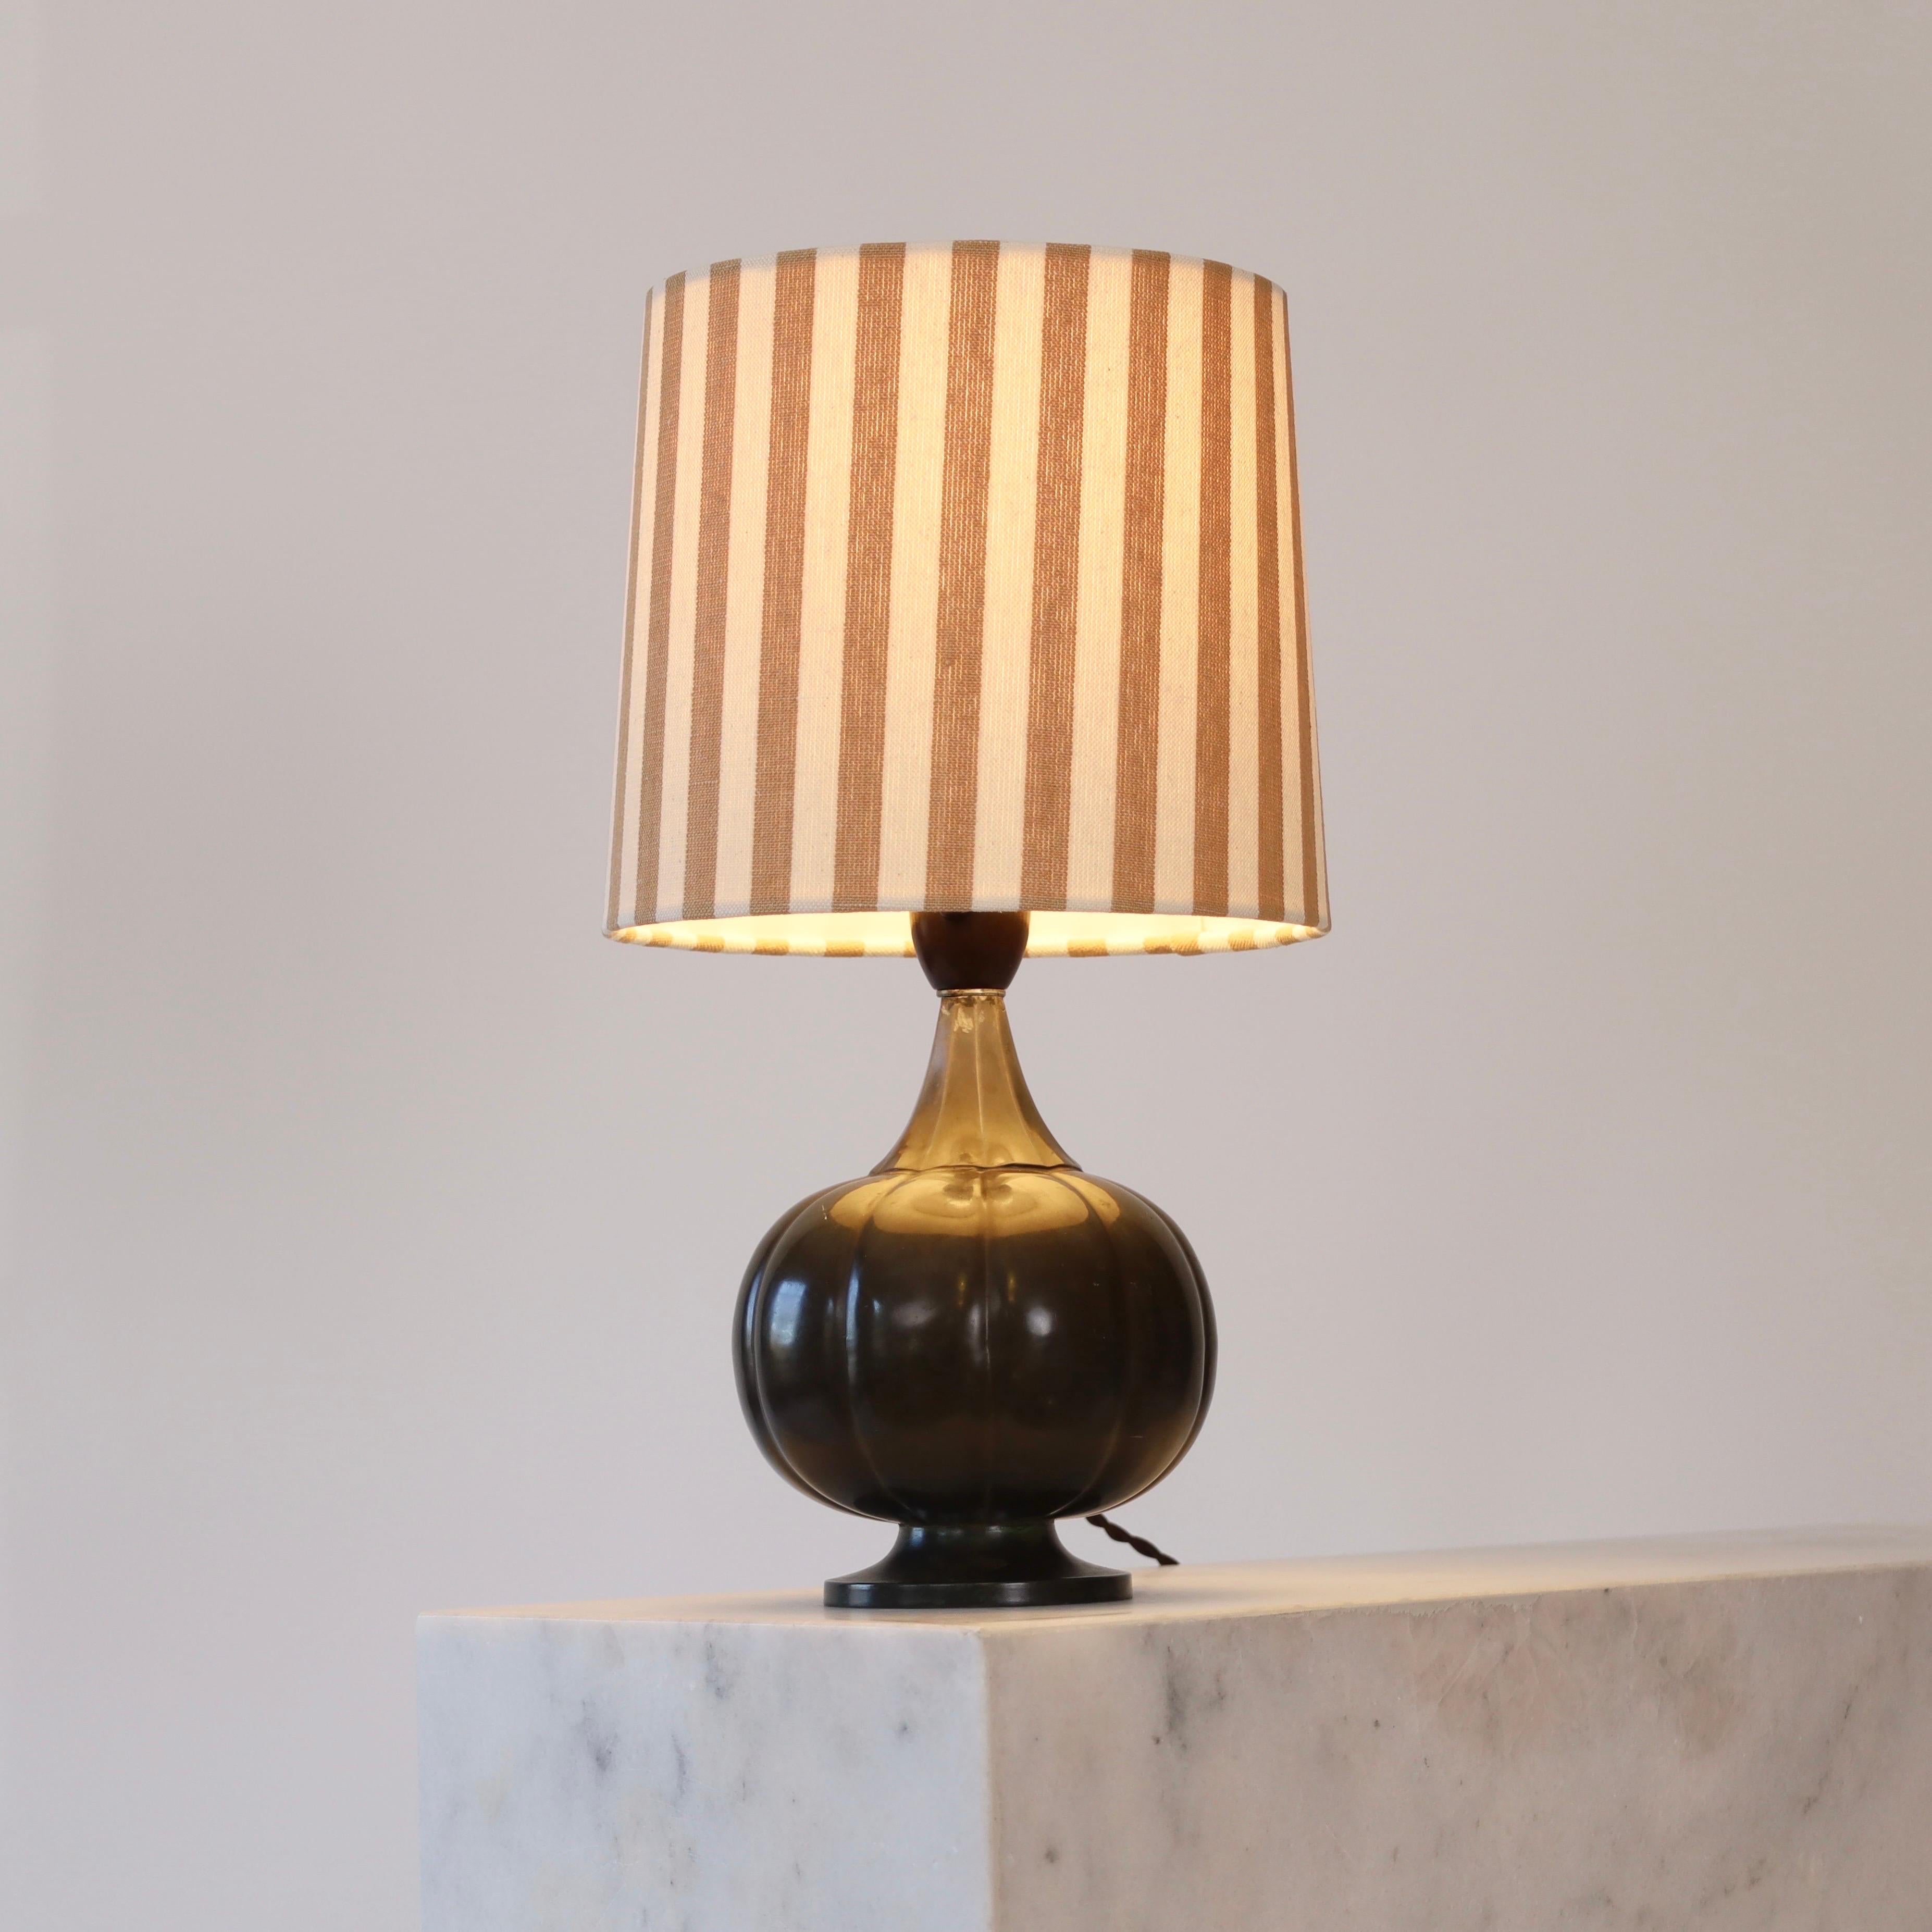 Danish A round Just Andersen Table Lamp, 1920s, Denmark For Sale